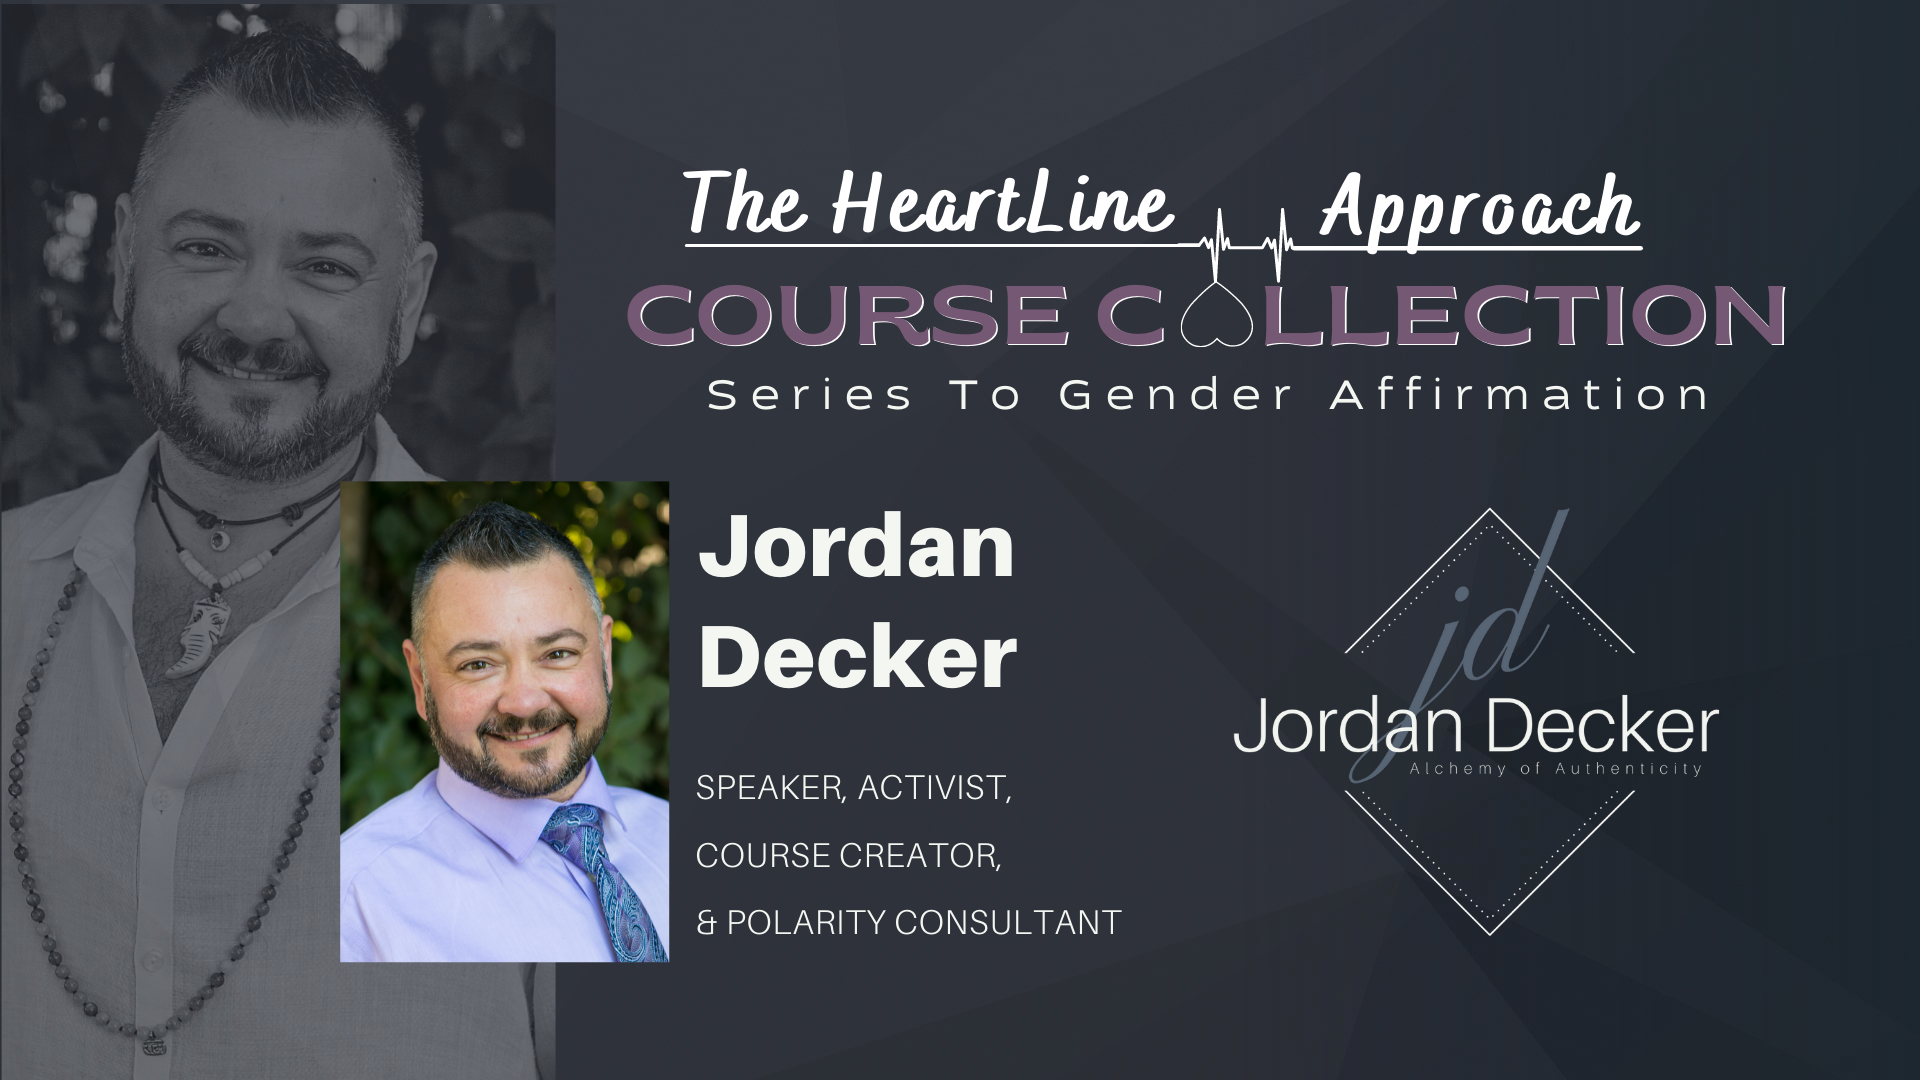 The HeartLine Approach to Gender Affirmation for the Caregivers